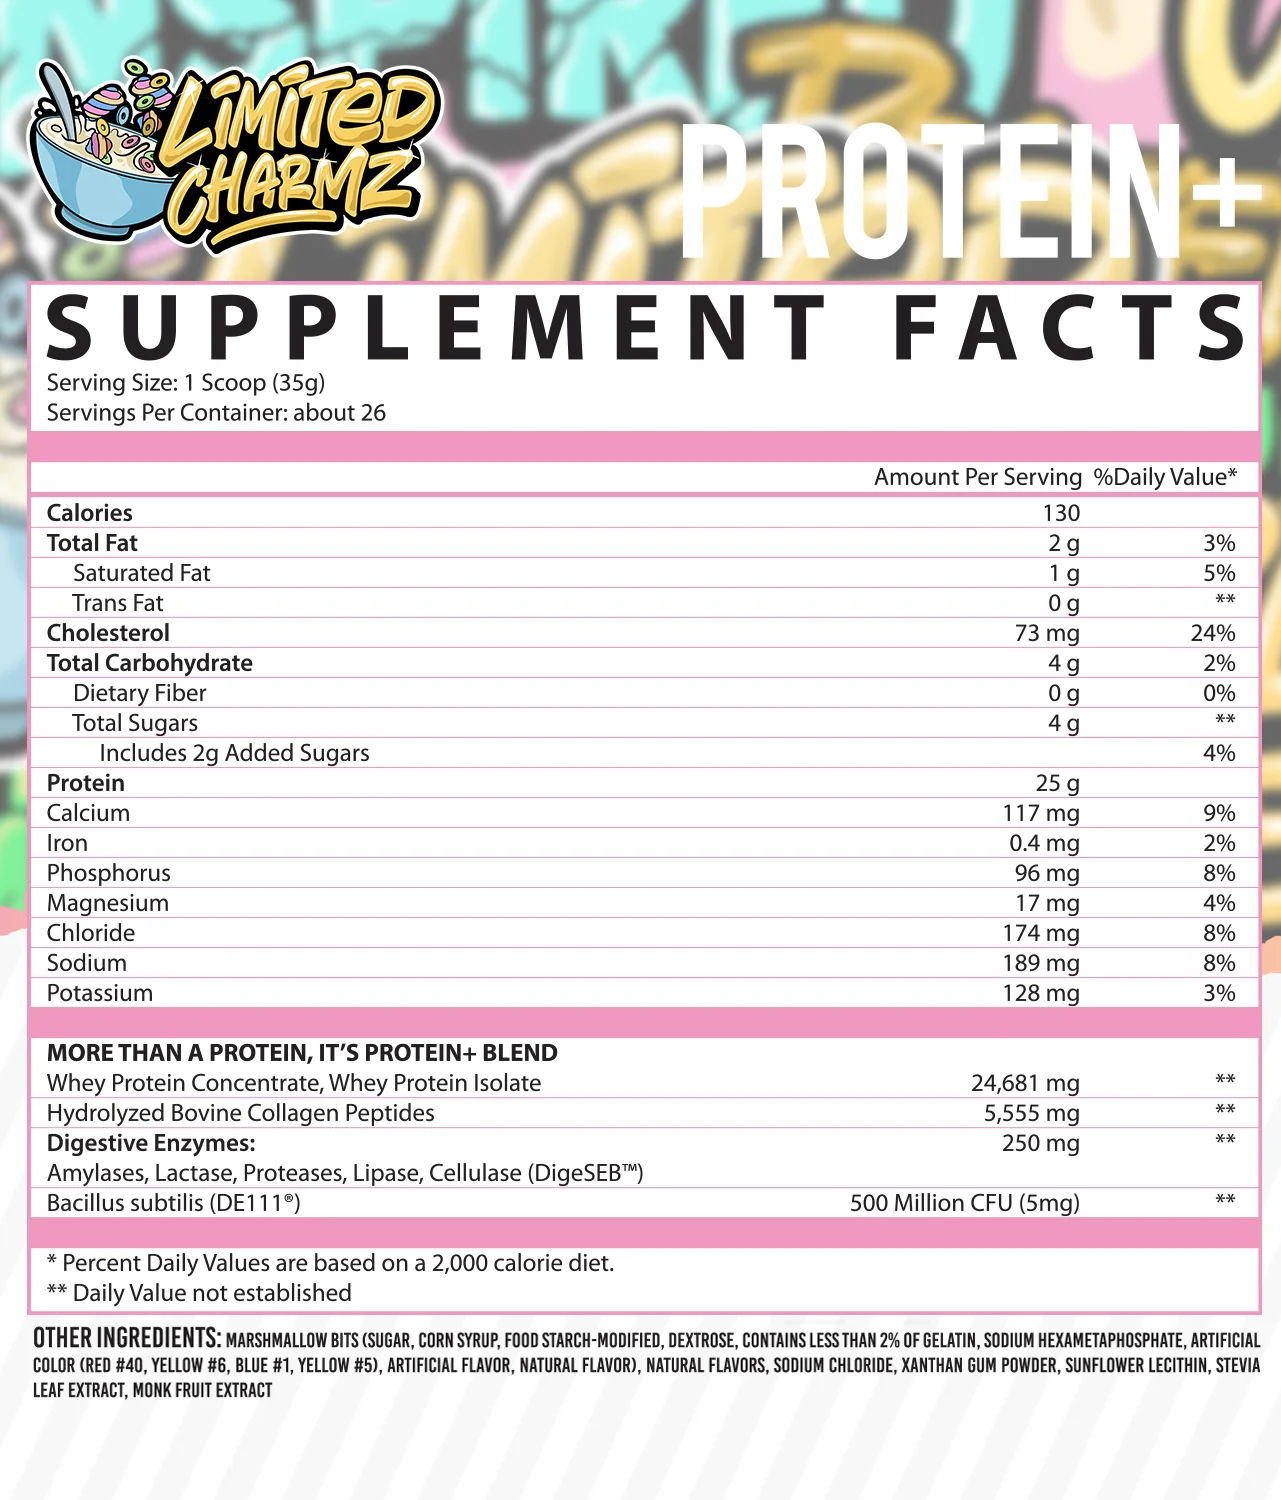 Supplement facts for Limited A Che Protein Charmz: 26 servings of 35g each with key ingredients as Whey Protein and Digestive Enzymes. Contains 130 calories per serving.